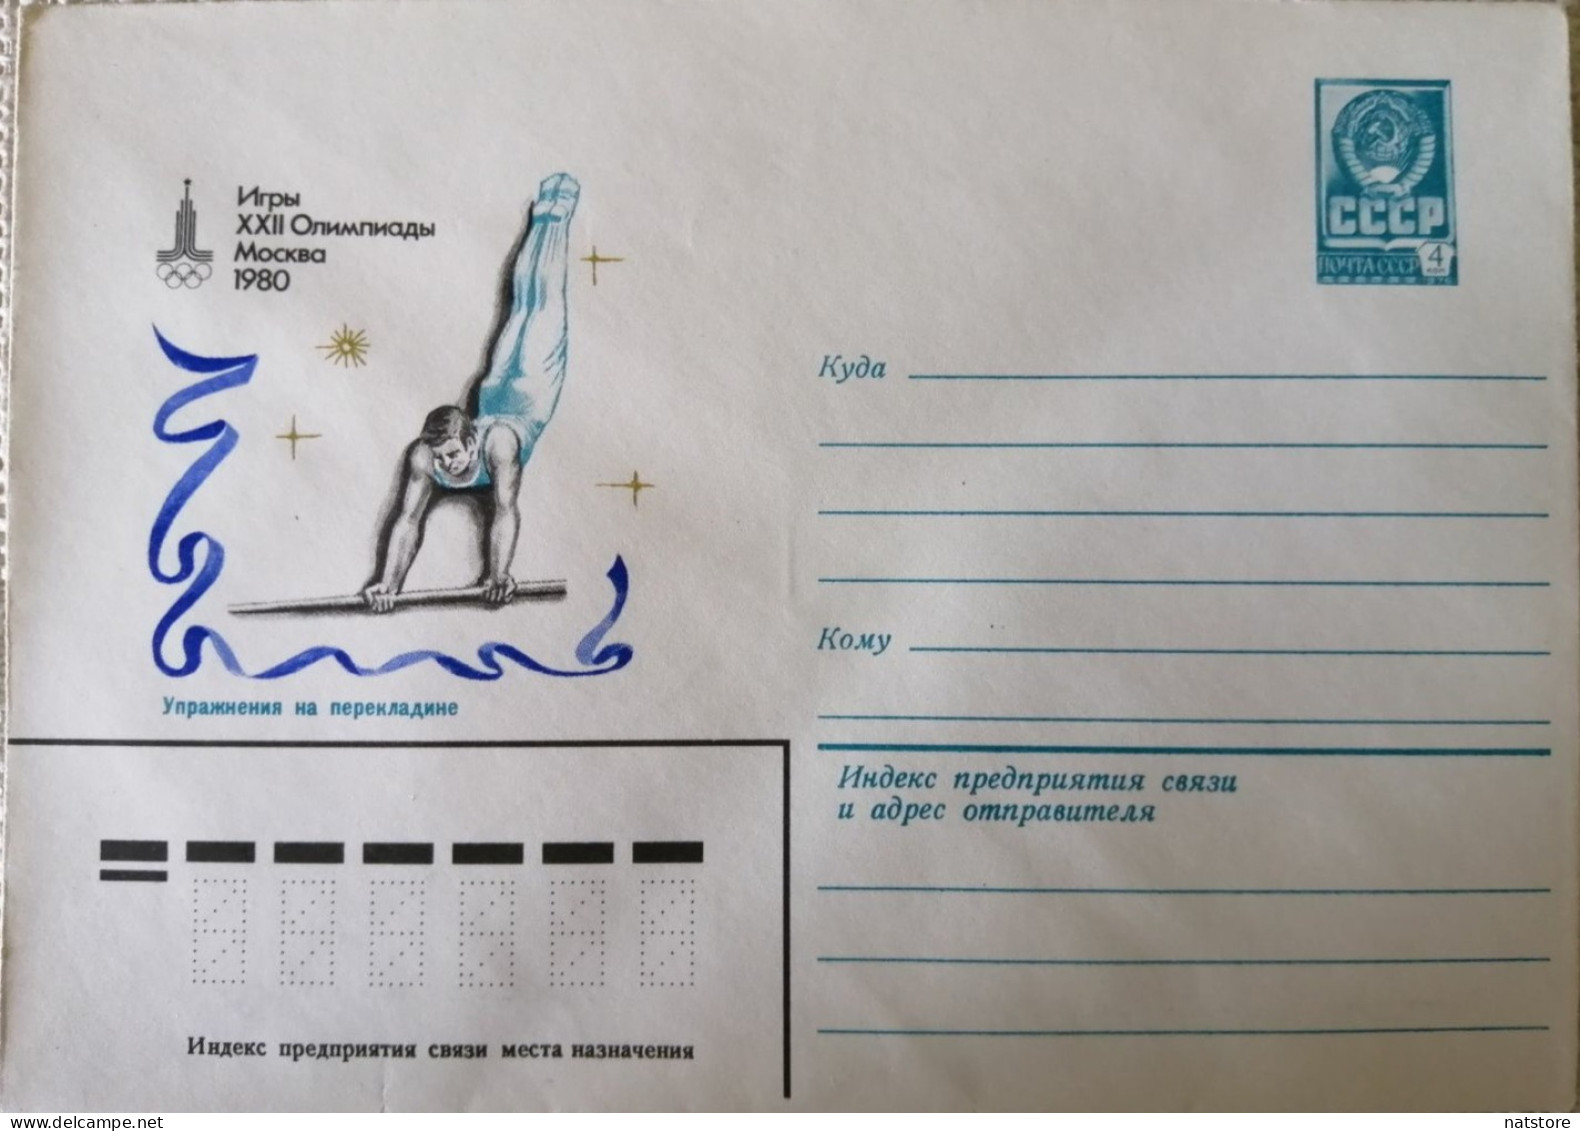 1980 VINTAGE ENVELOPE WITH PRINTED STAMP. " GAMES OF THE XXII OLYMPIAD.MOSCOW...1980"  CROSSBAR EXERCISES   . NEW. - Sommer 1980: Moskau